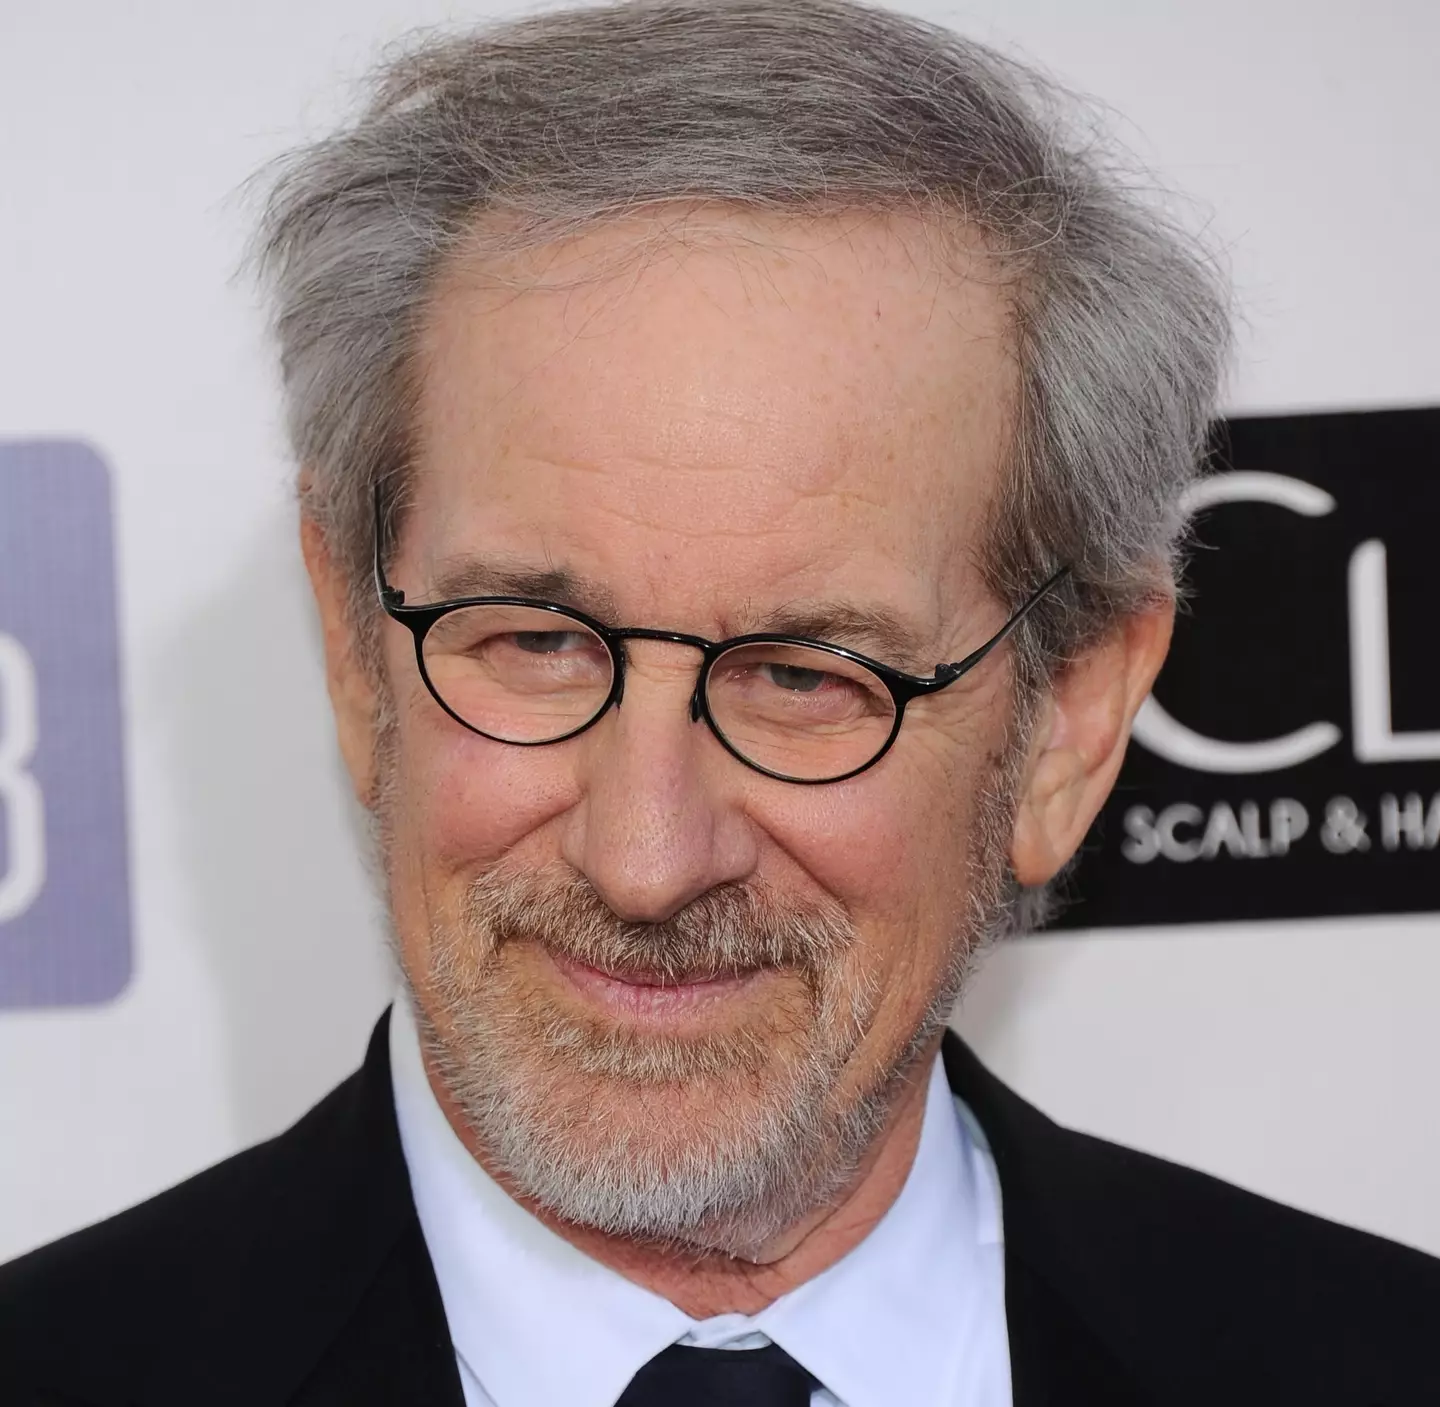 Steven Spielberg had had a long and successful career as a director, but he would not take money for Schindler's List as he considered it 'blood money'.